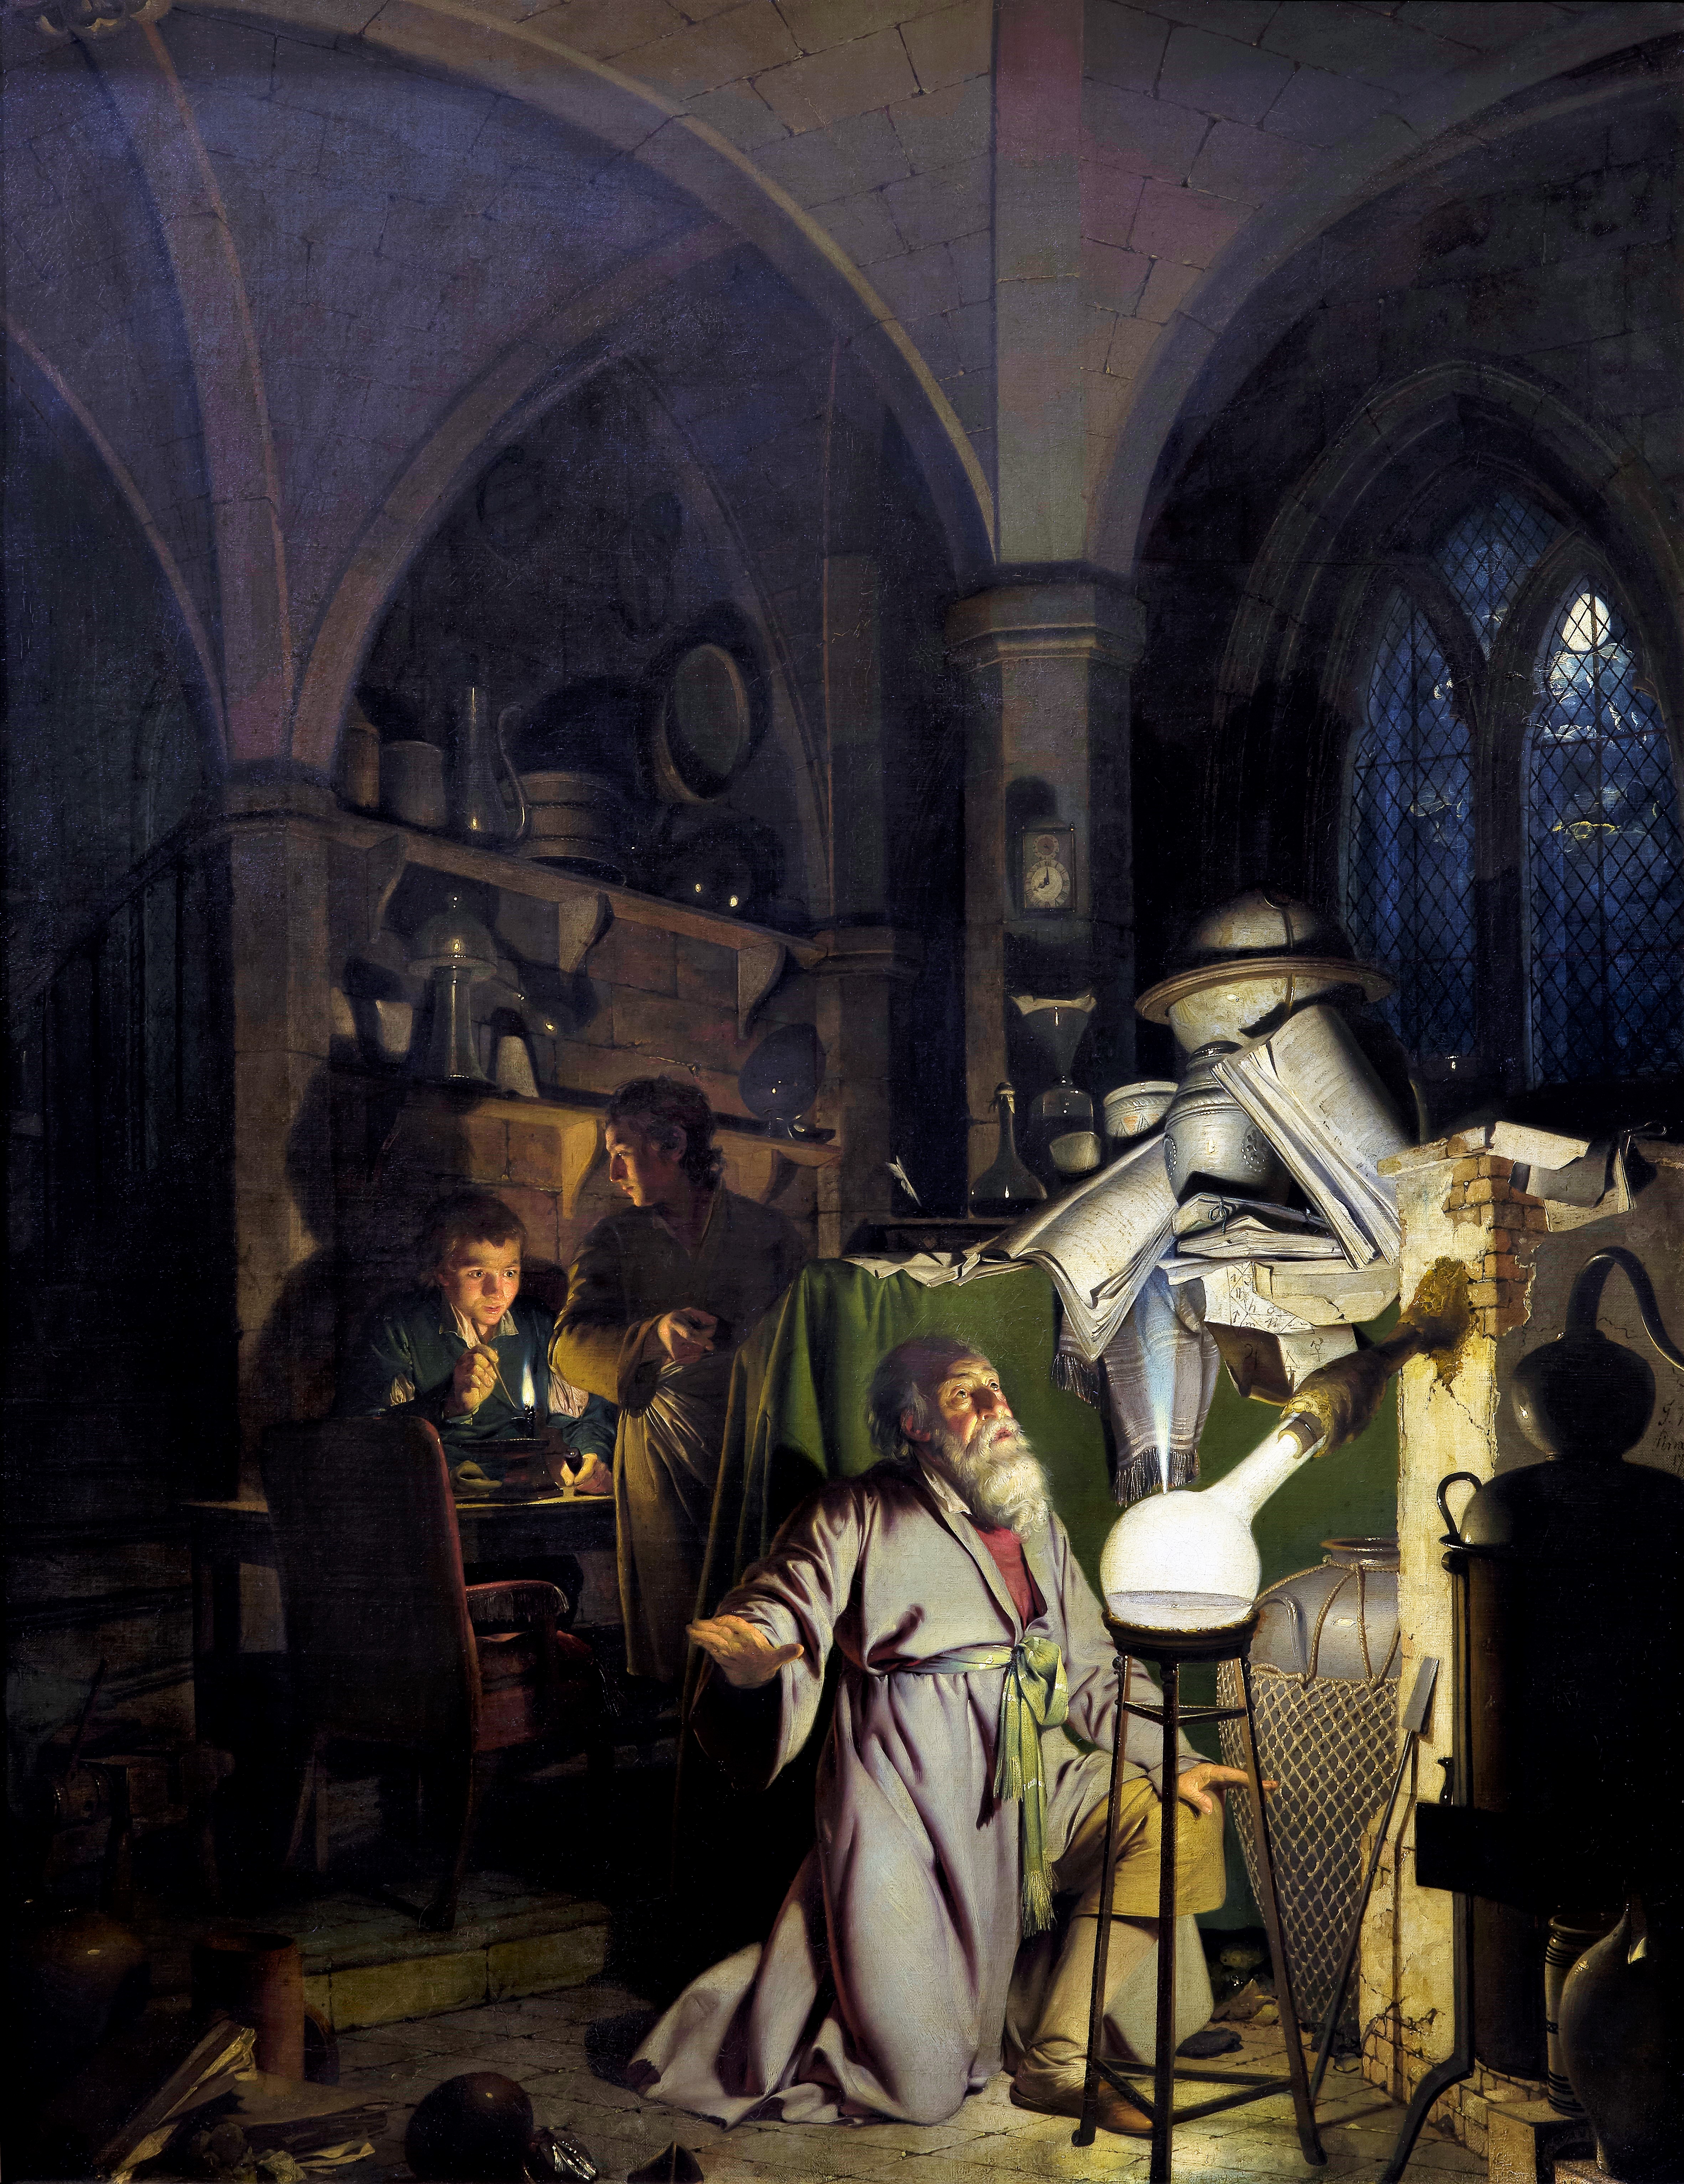 "The Alchemist Discovering Phosphorus" by Joseph Wright of Derby